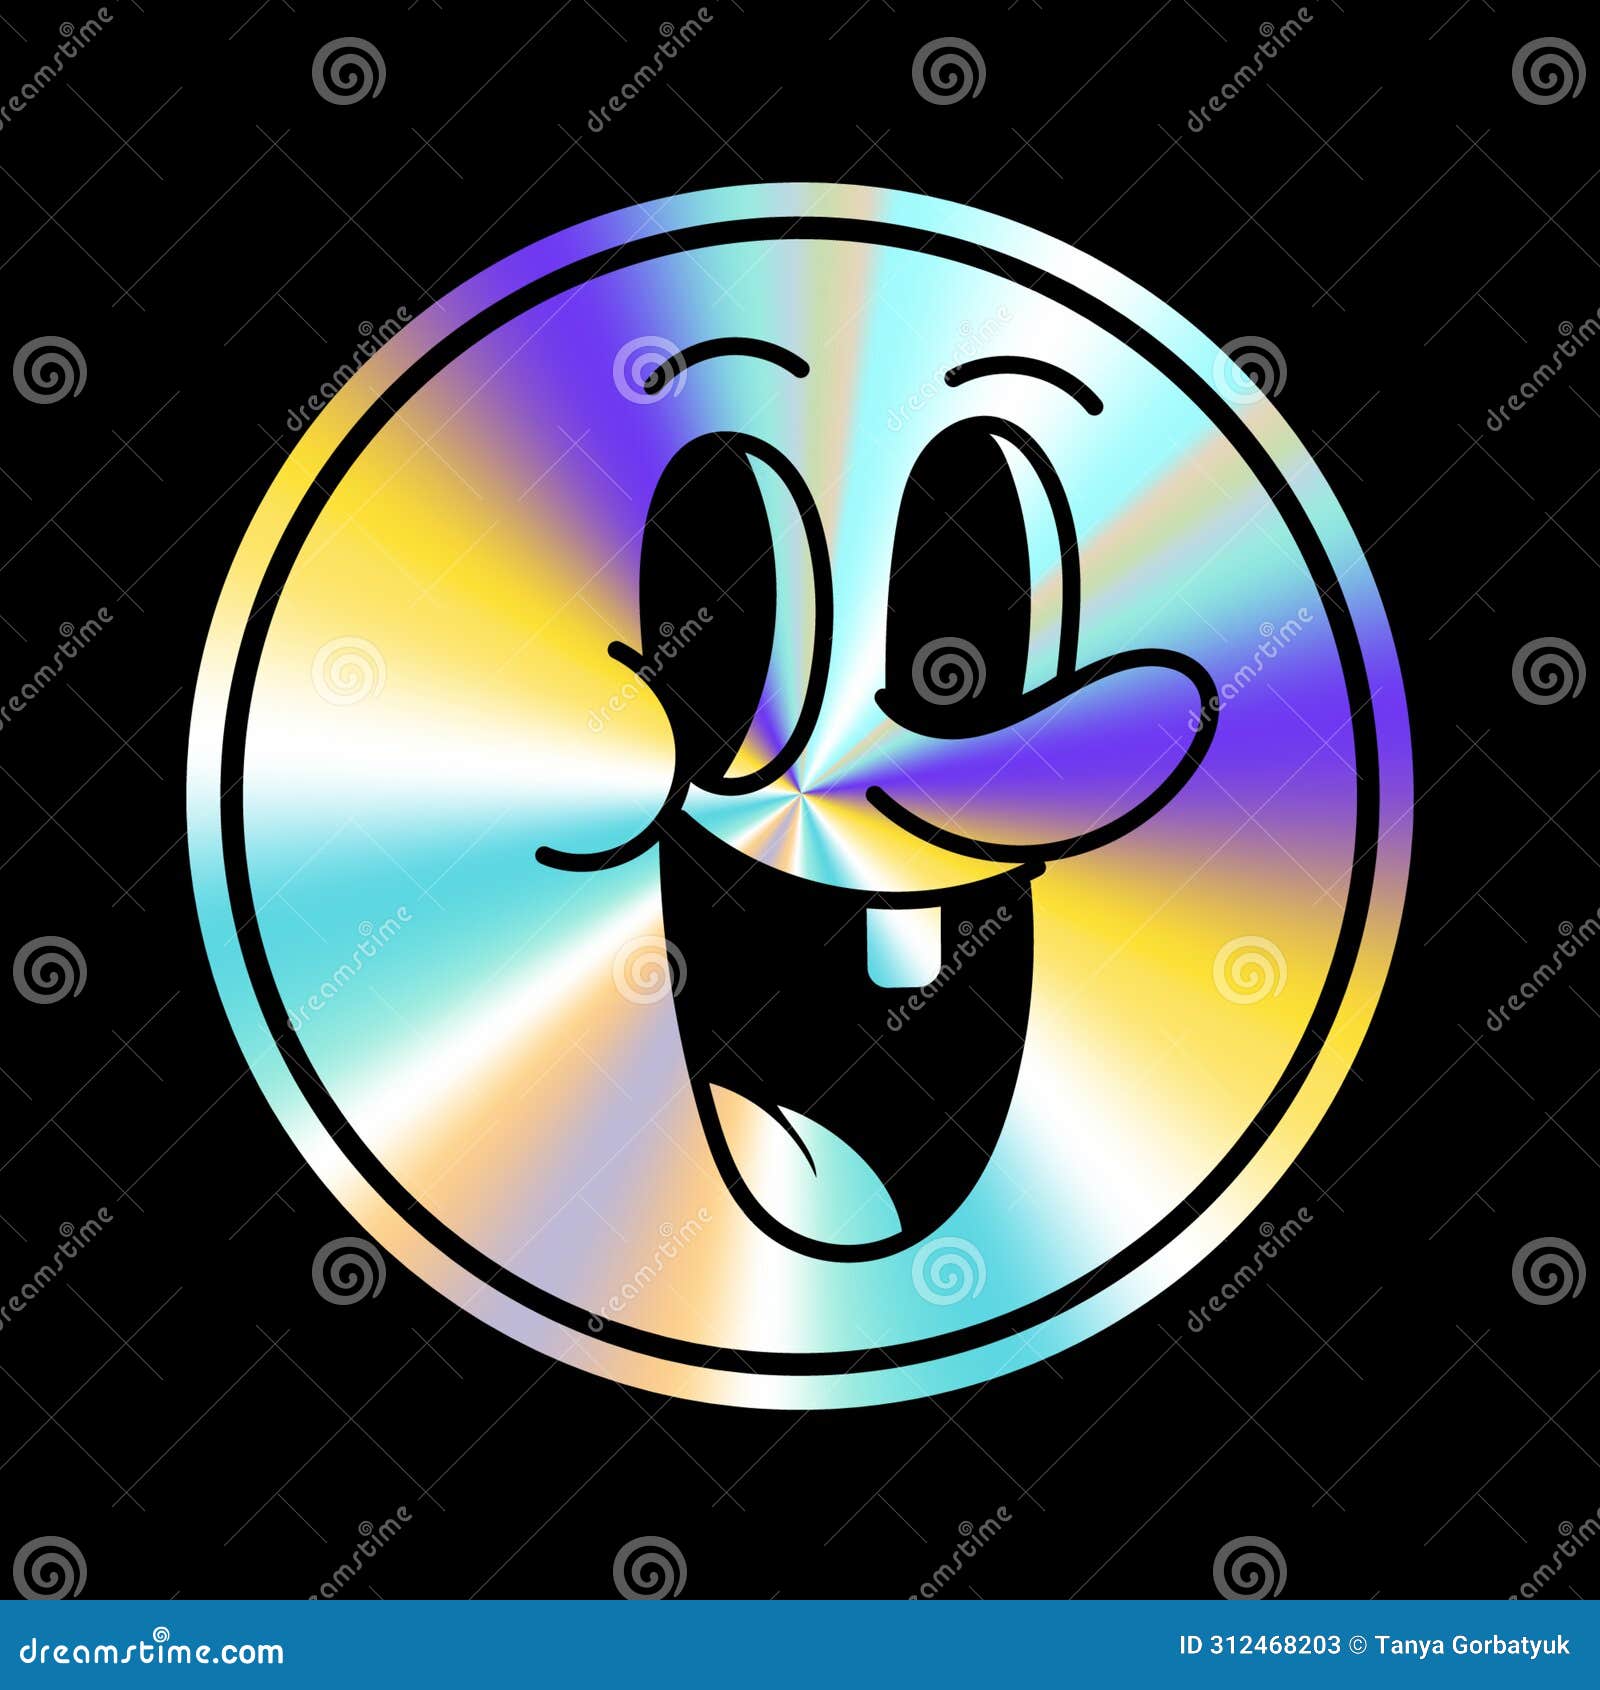 holographic sticker with cartoon face